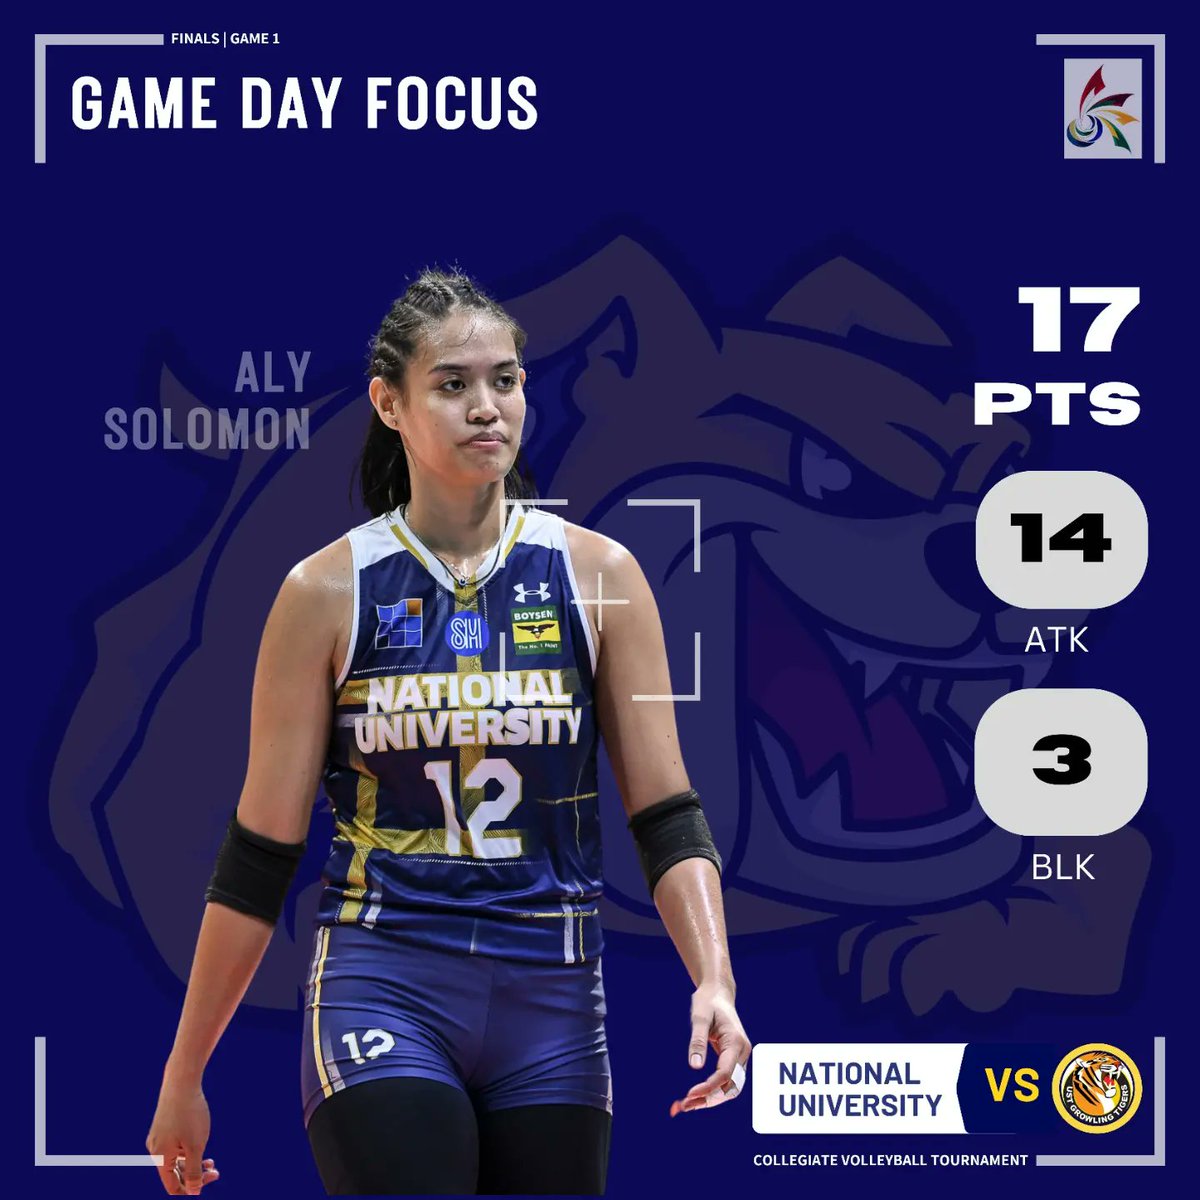 ONE MORE FOR JHOCSON! 💛💙

The NU Bulldogs dominated the Tigers, 25-23, 25-20, 25-20, today at the SMART Araneta Coliseum to bring them one step closer to the crown.

Player of the Game: Alyssa Solomon
17 points - 14 attacks and 3 blocks

📷: UAAP Media Bureau 
#GoBulldogs